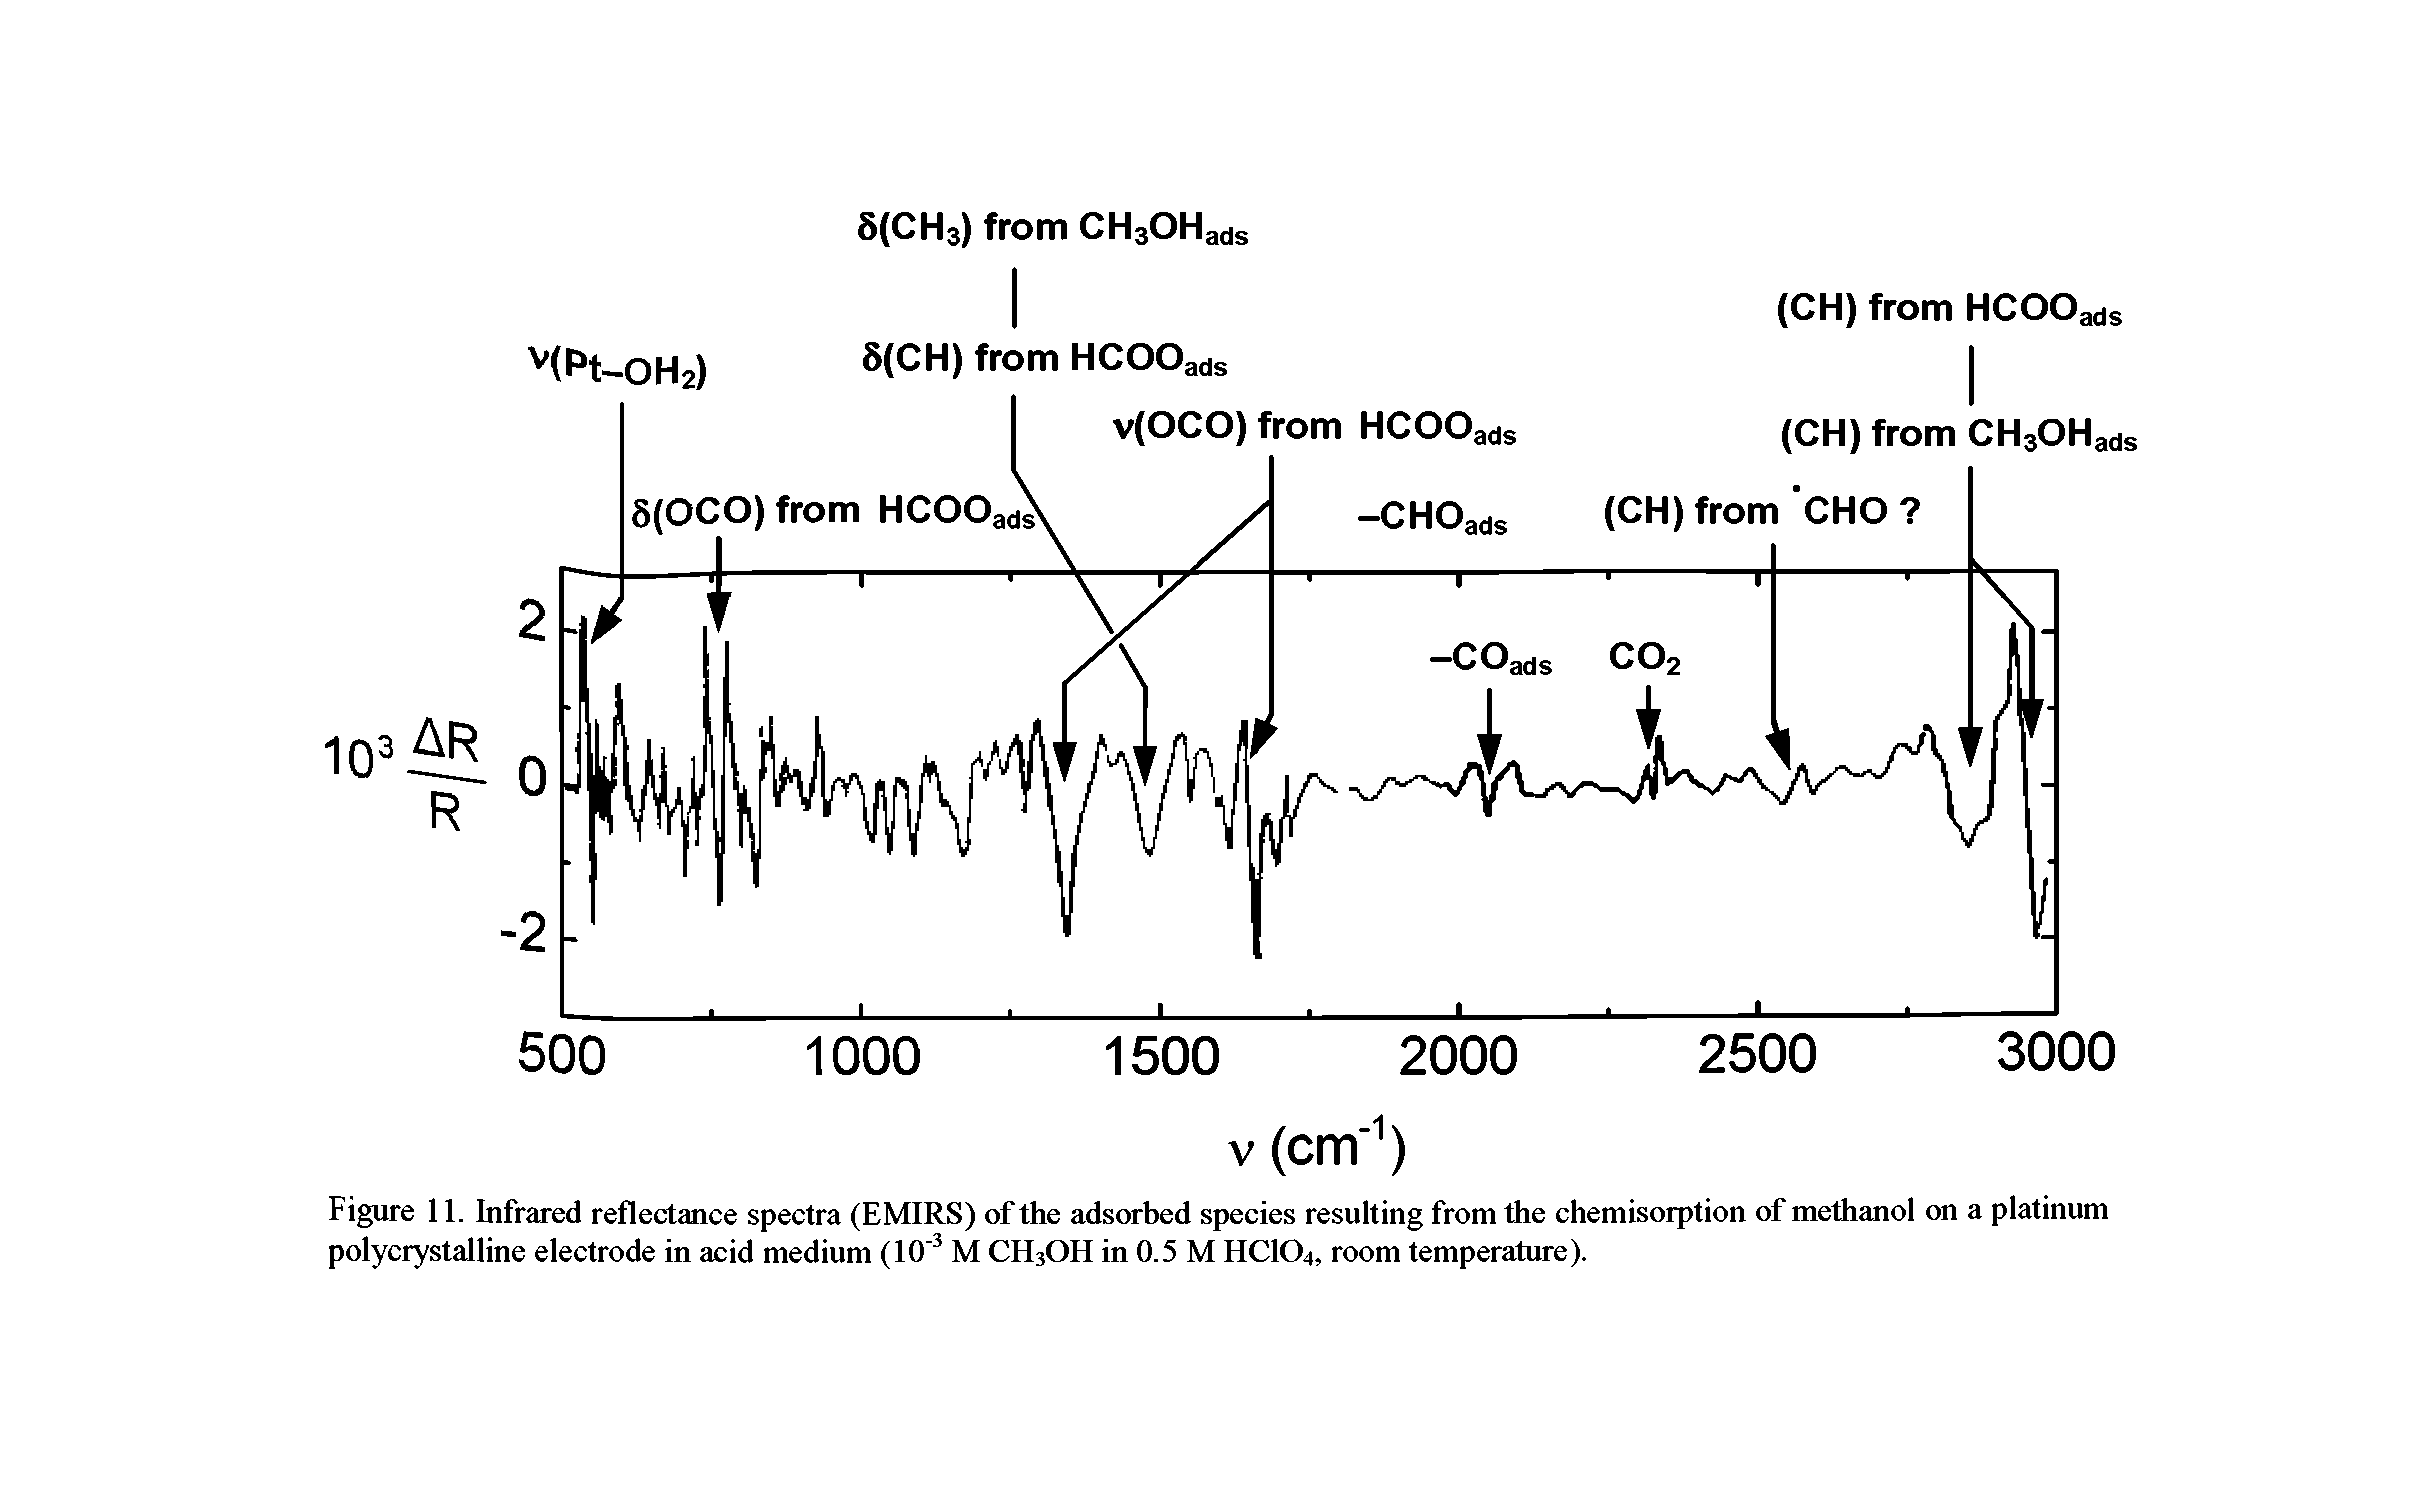 Figure 11. Infrared reflectance spectra (EMIRS) of the adsorbed species resulting from the chemisorption of methanol on a platinum polycrystalline electrode in acid medium (10 M CH3OH in 0.5 M HCIO4, room temperature).